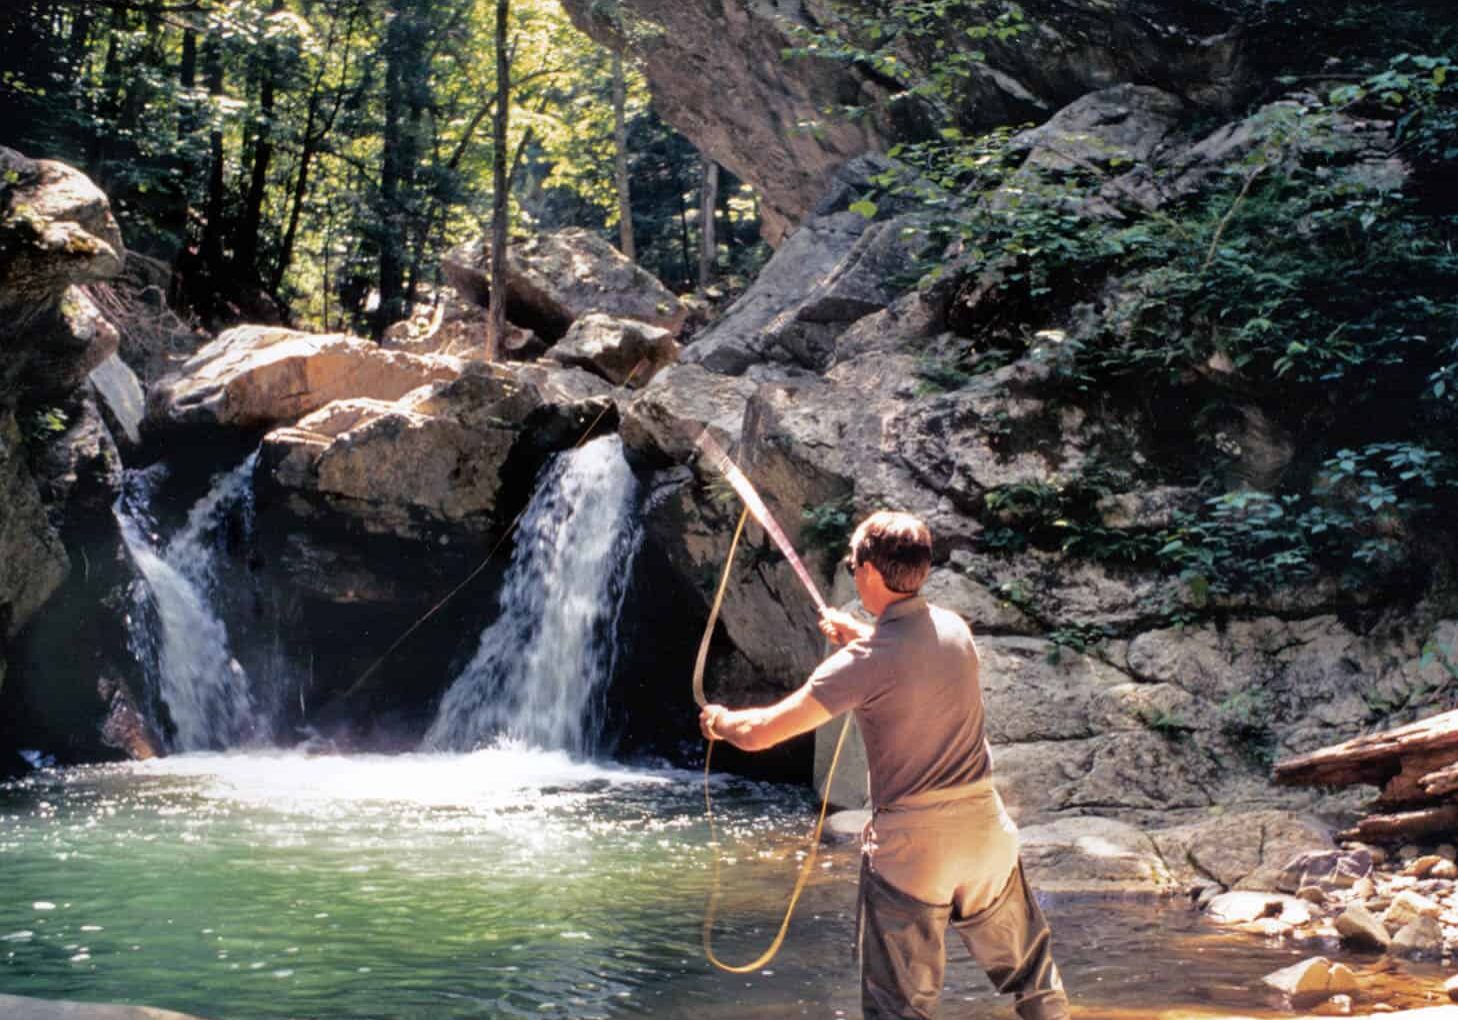 Fishing– Bath County is home to some of the most pristine mountain trout streams in Virginia and is a beloved haven for anglers.